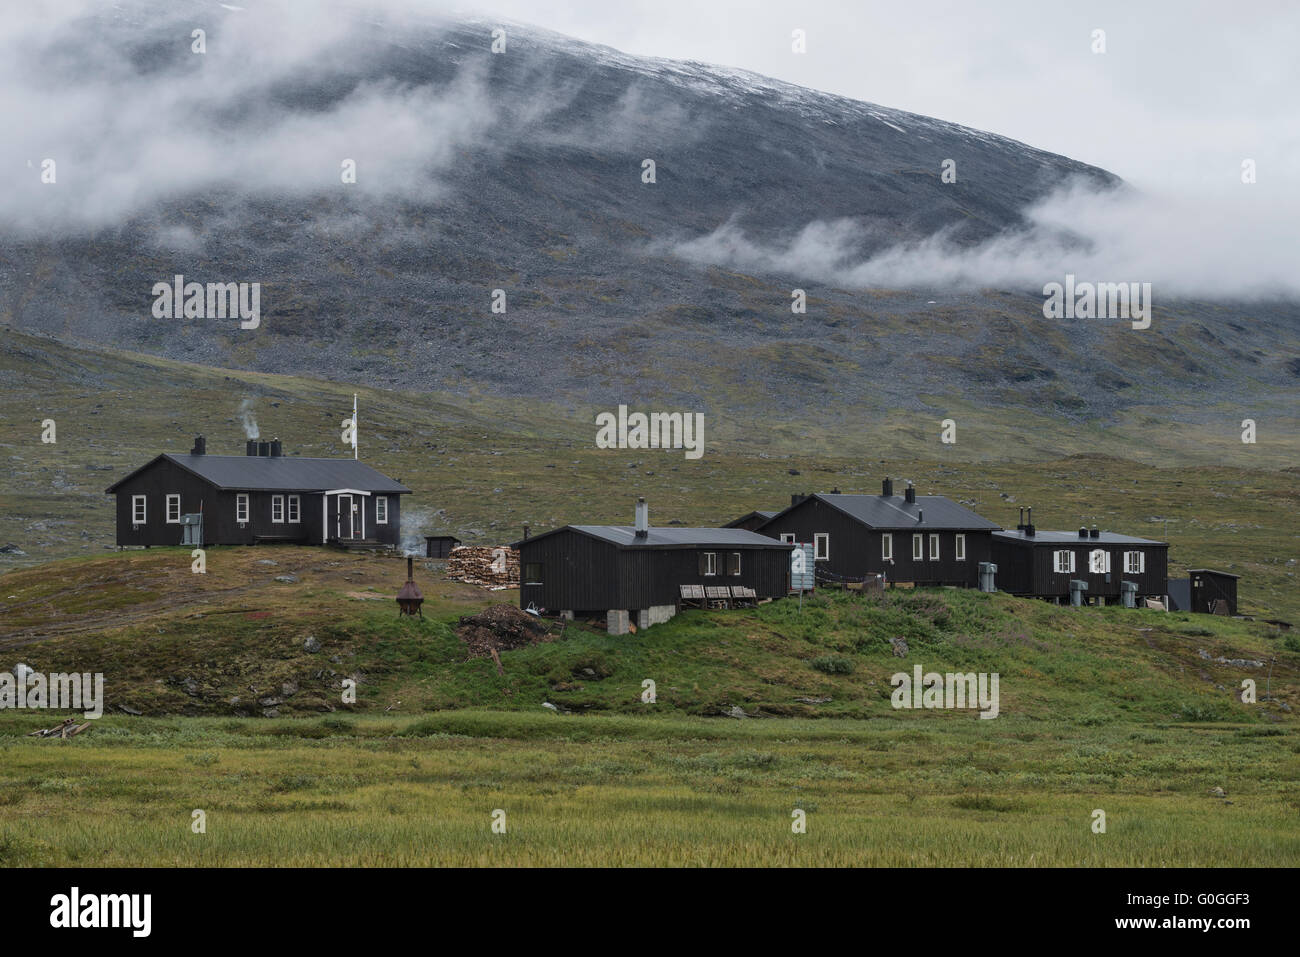 STF Sälka mountan hut surrounded by misty mountains in autumn, Kungsleden Trail, Lapland, Sweden Stock Photo